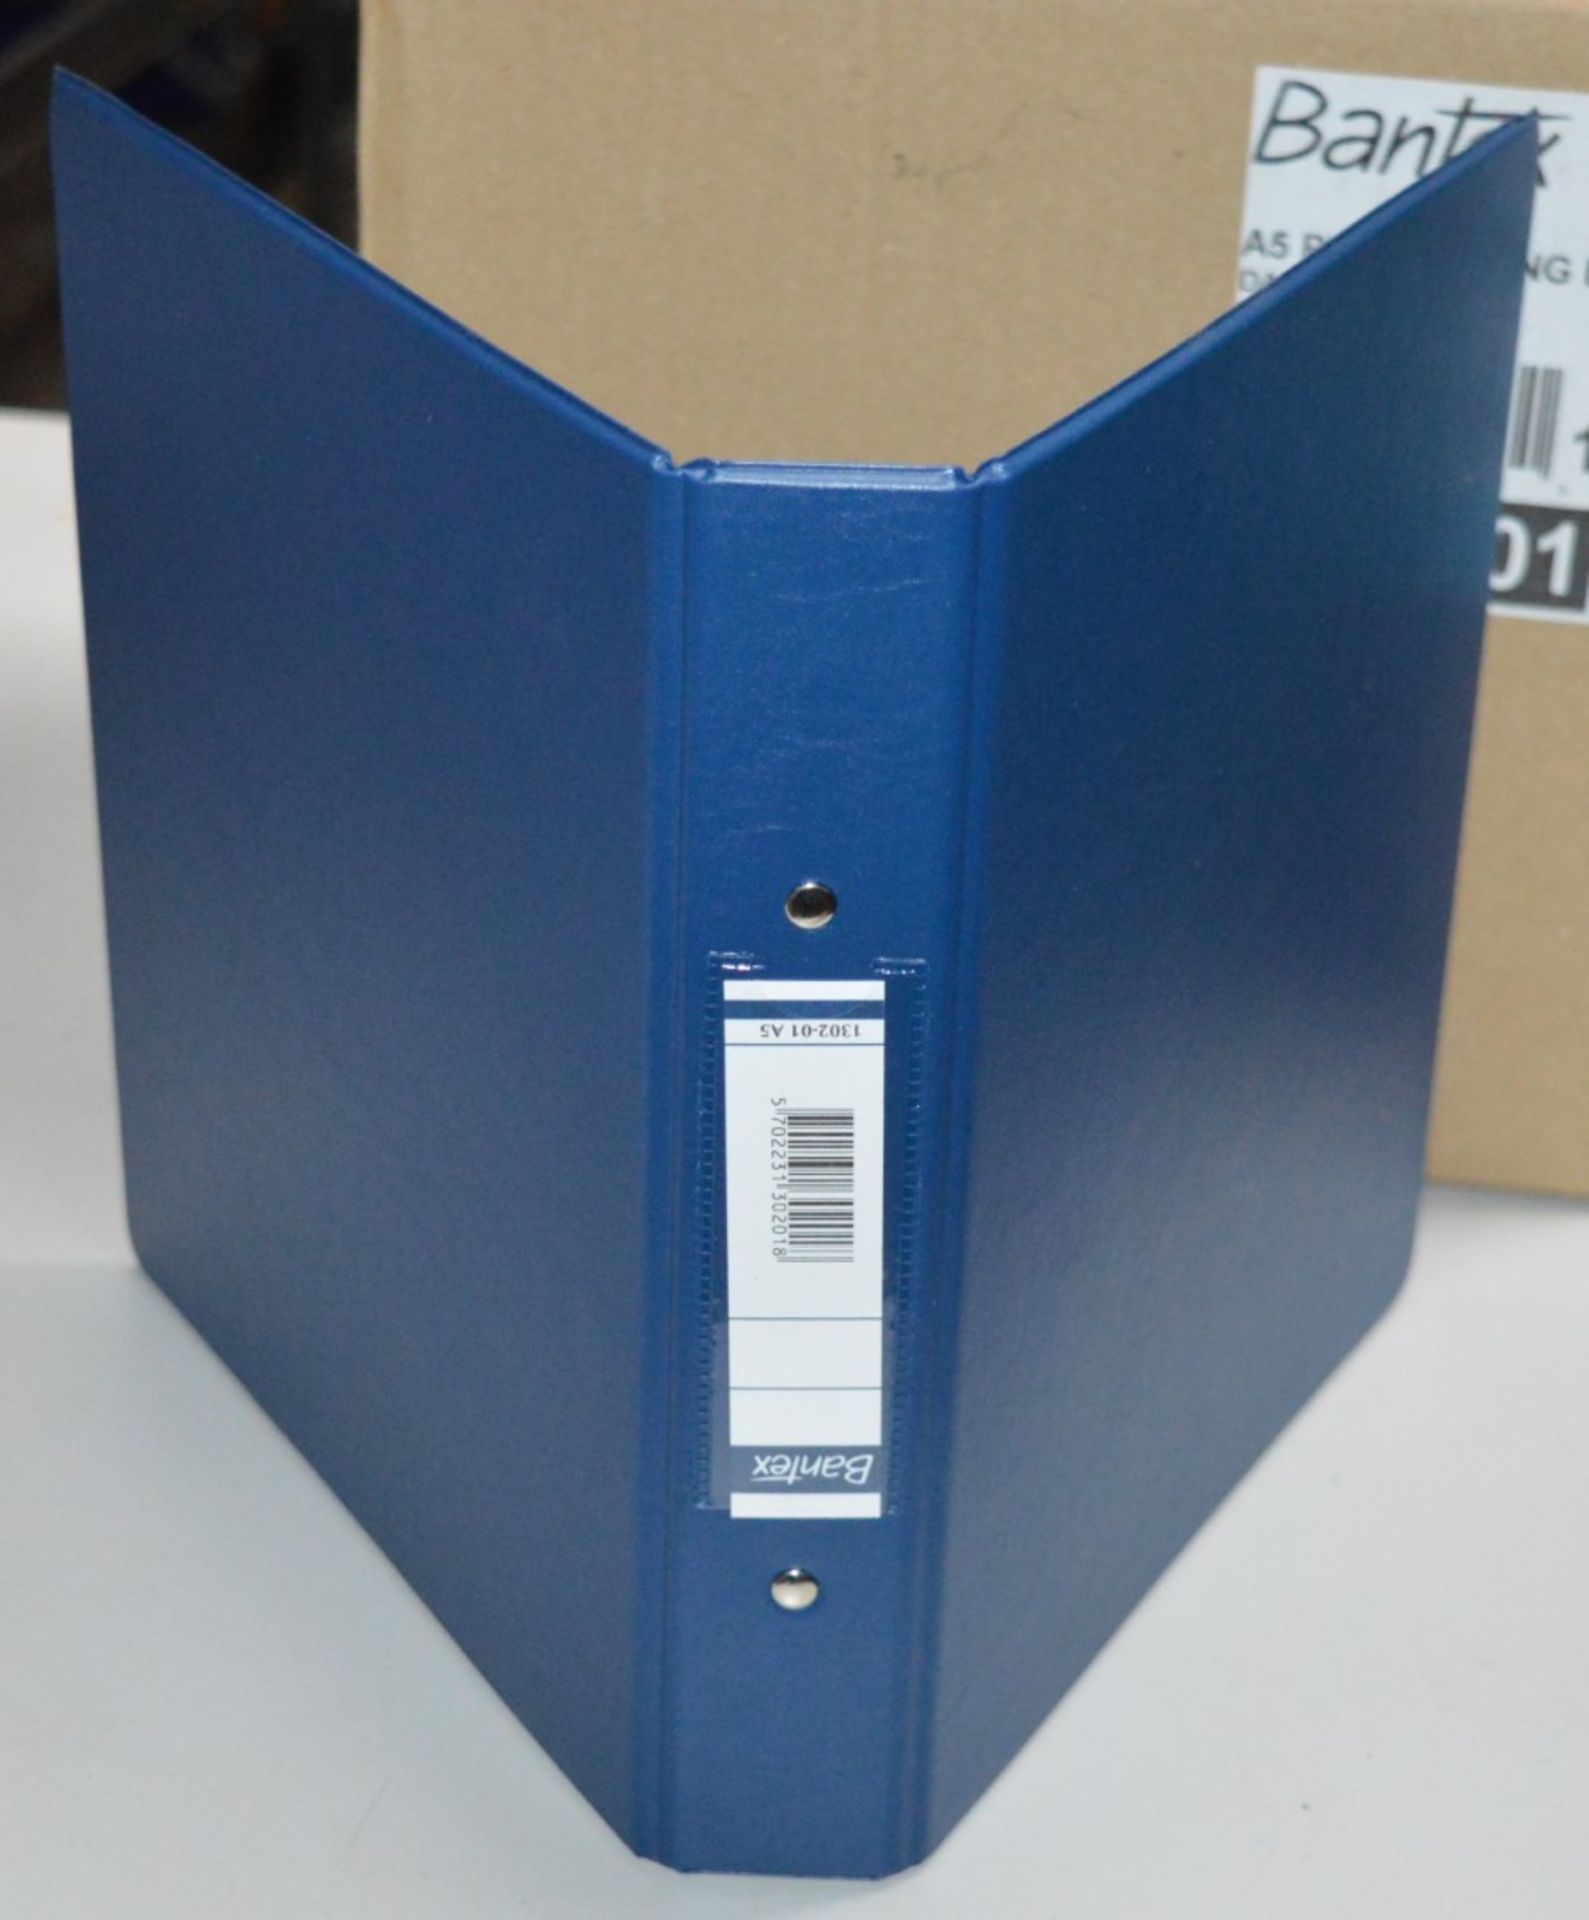 30 x Bantex A5 Plastic Ring Binders - Dark Blue, 2 Ring, 25mm - New Boxed Stock - CL011 - Ref 1302- - Image 4 of 4